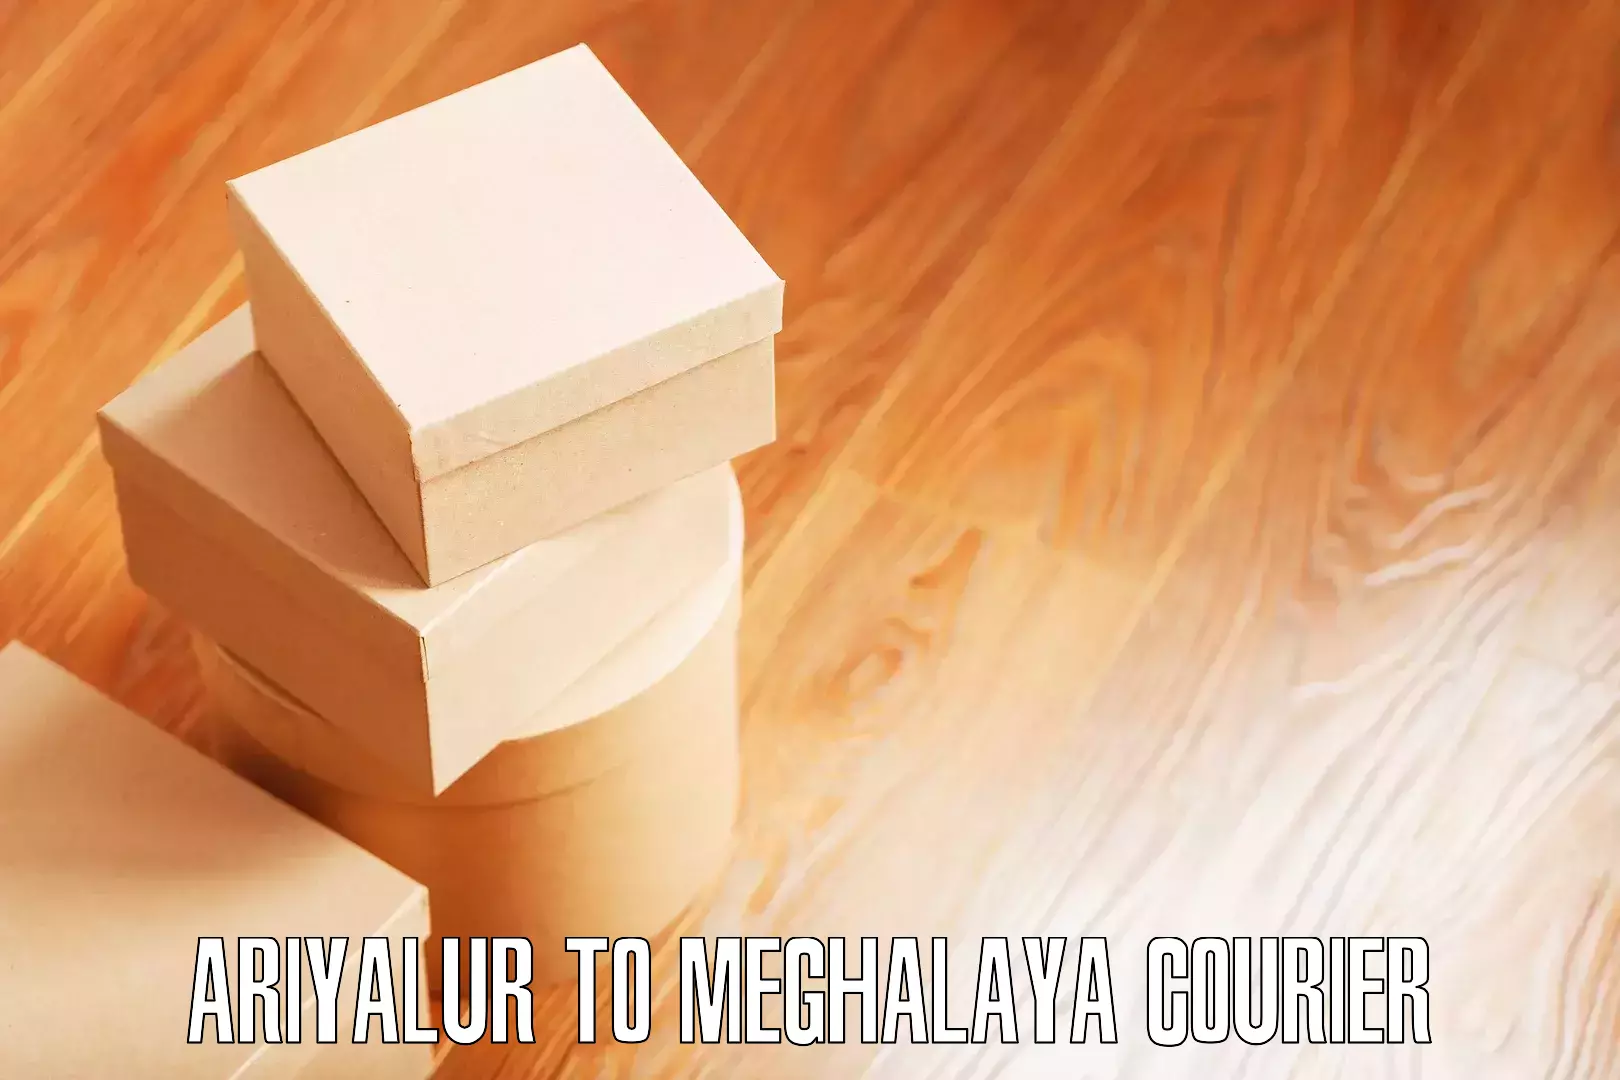 Furniture delivery service Ariyalur to Tura